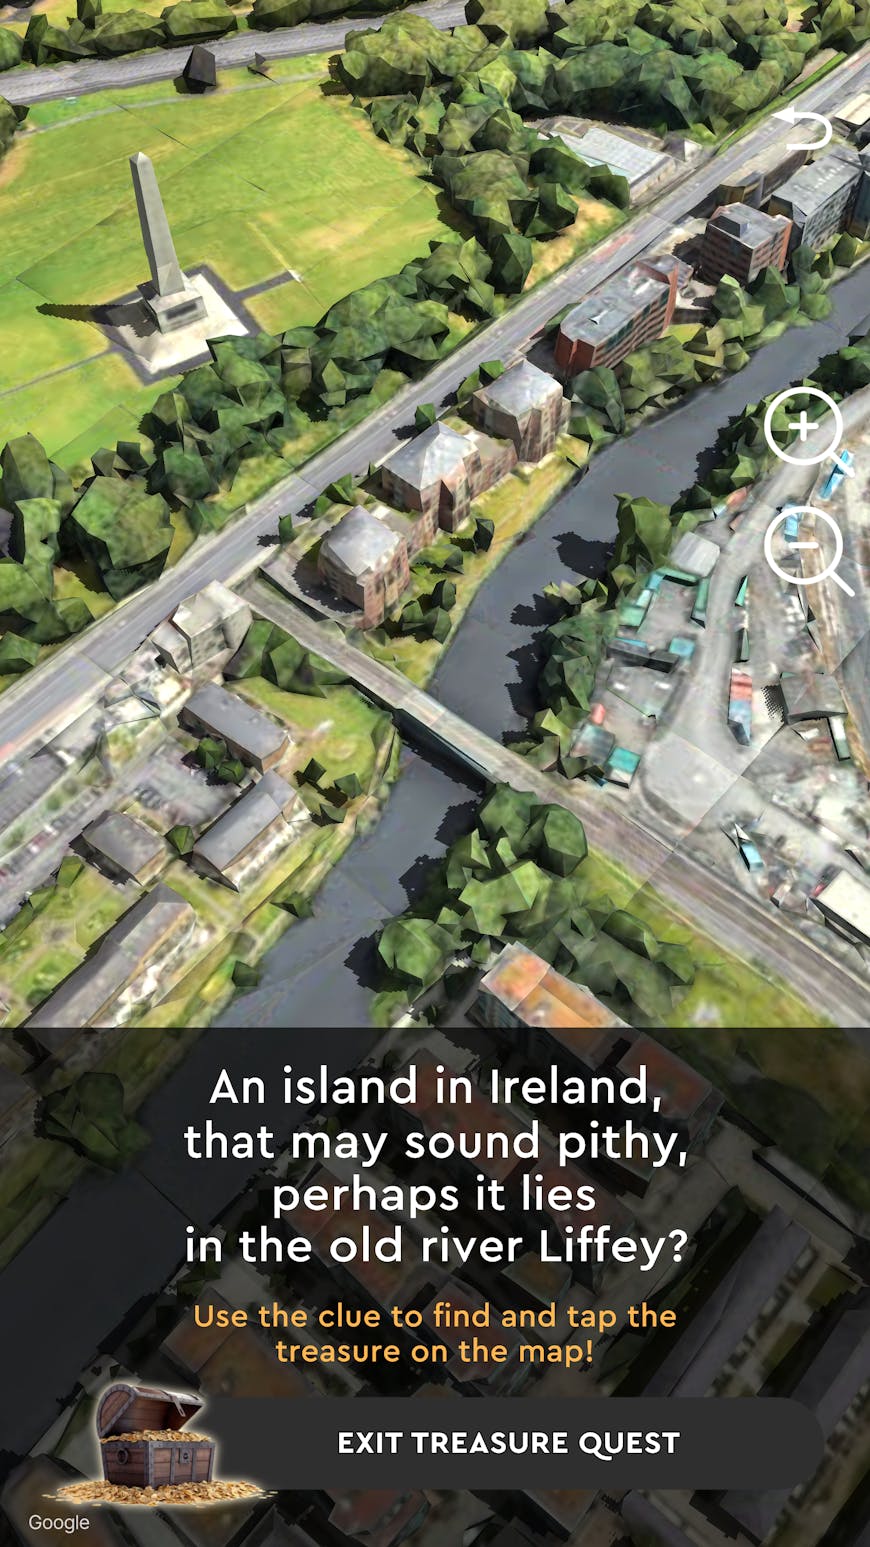 Gamifying a tour of Dublin and presenting the experience in 3D helps with connection to the city. The River Liffey is shown here as Photorealistic 3D Tiles with text reading "An island in Ireland, that may sound pithy, perhaps it lies in the old river Liffey?"